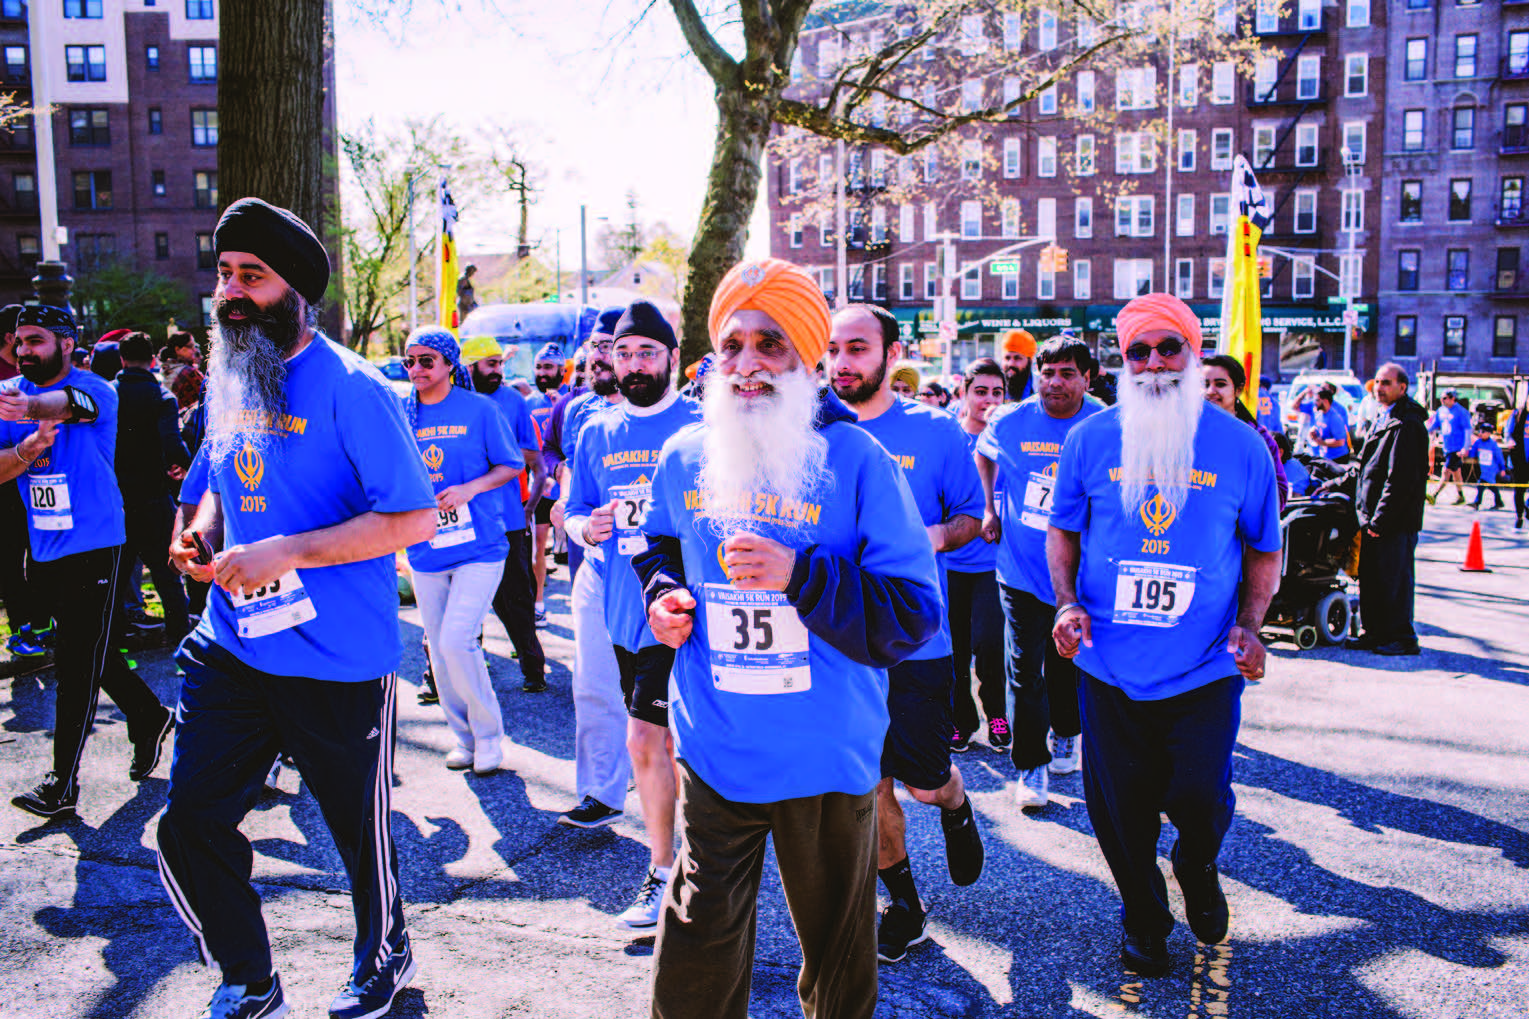 Vaisakhi 5 K Sikh Run 2015 a great attraction in New York, united States